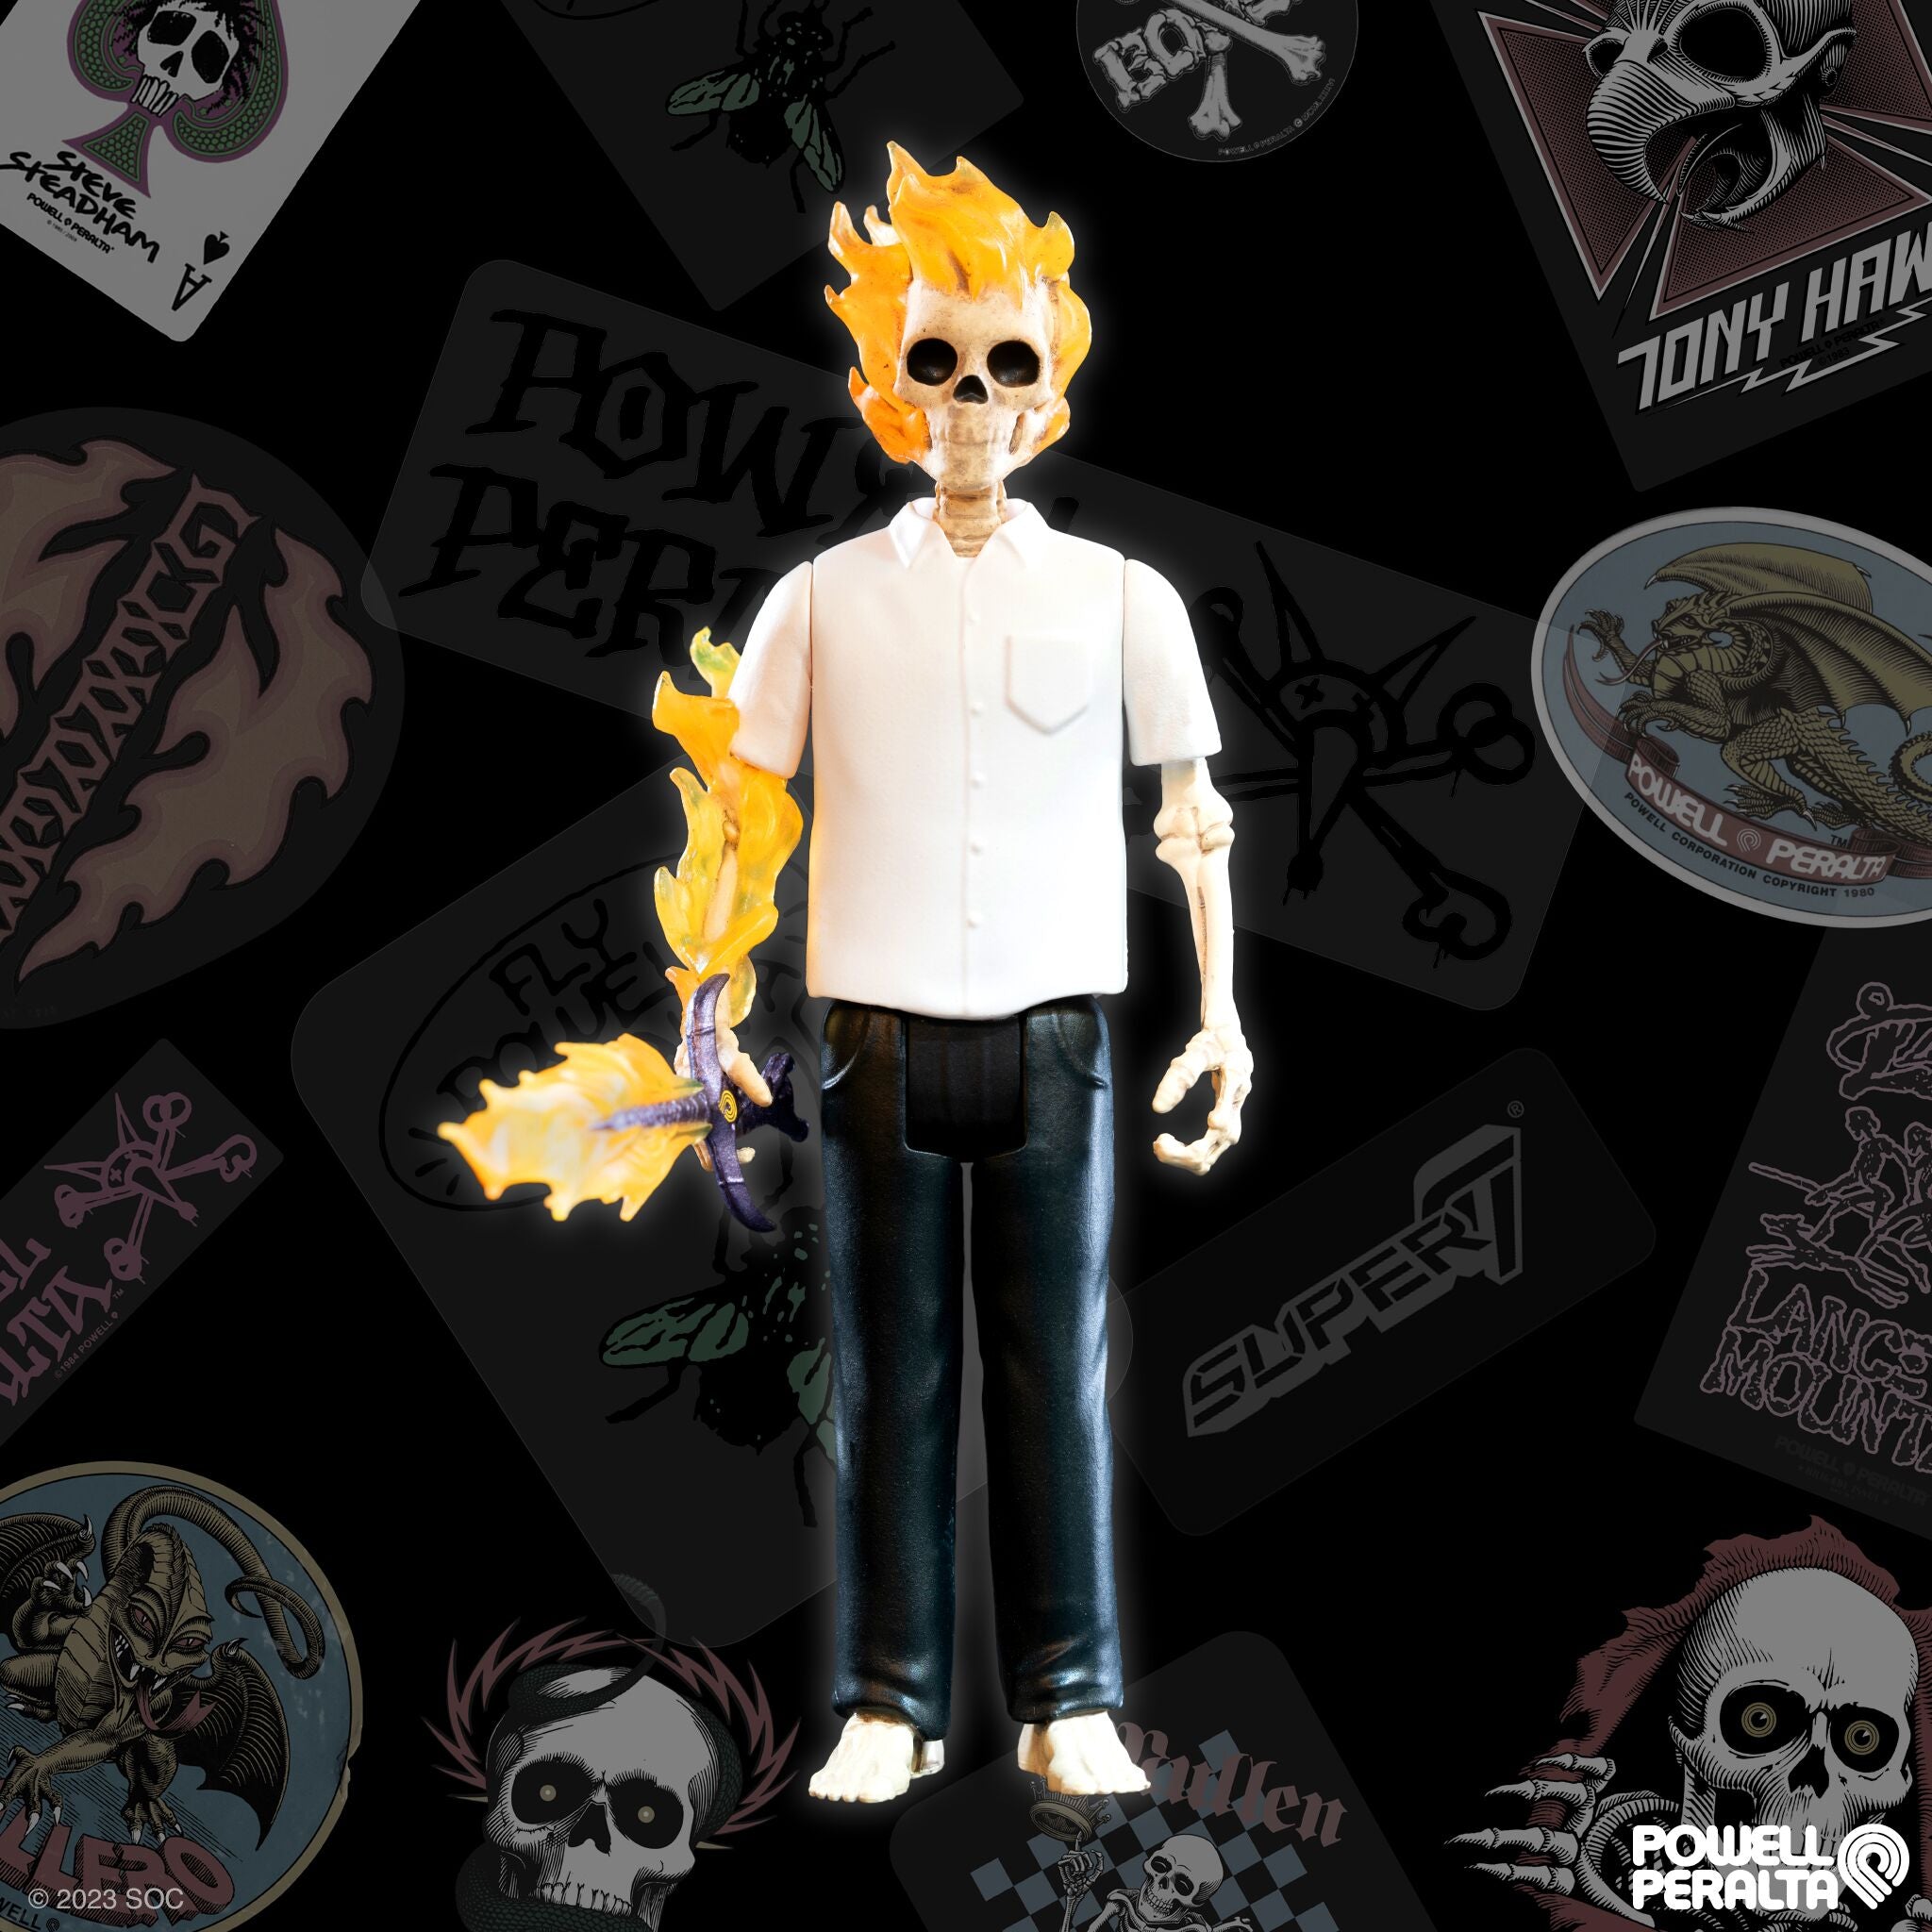 Powell-Peralta ReAction Figure Wave 3 - Tommy Guerrero Flaming Dagger (SF Downhill)